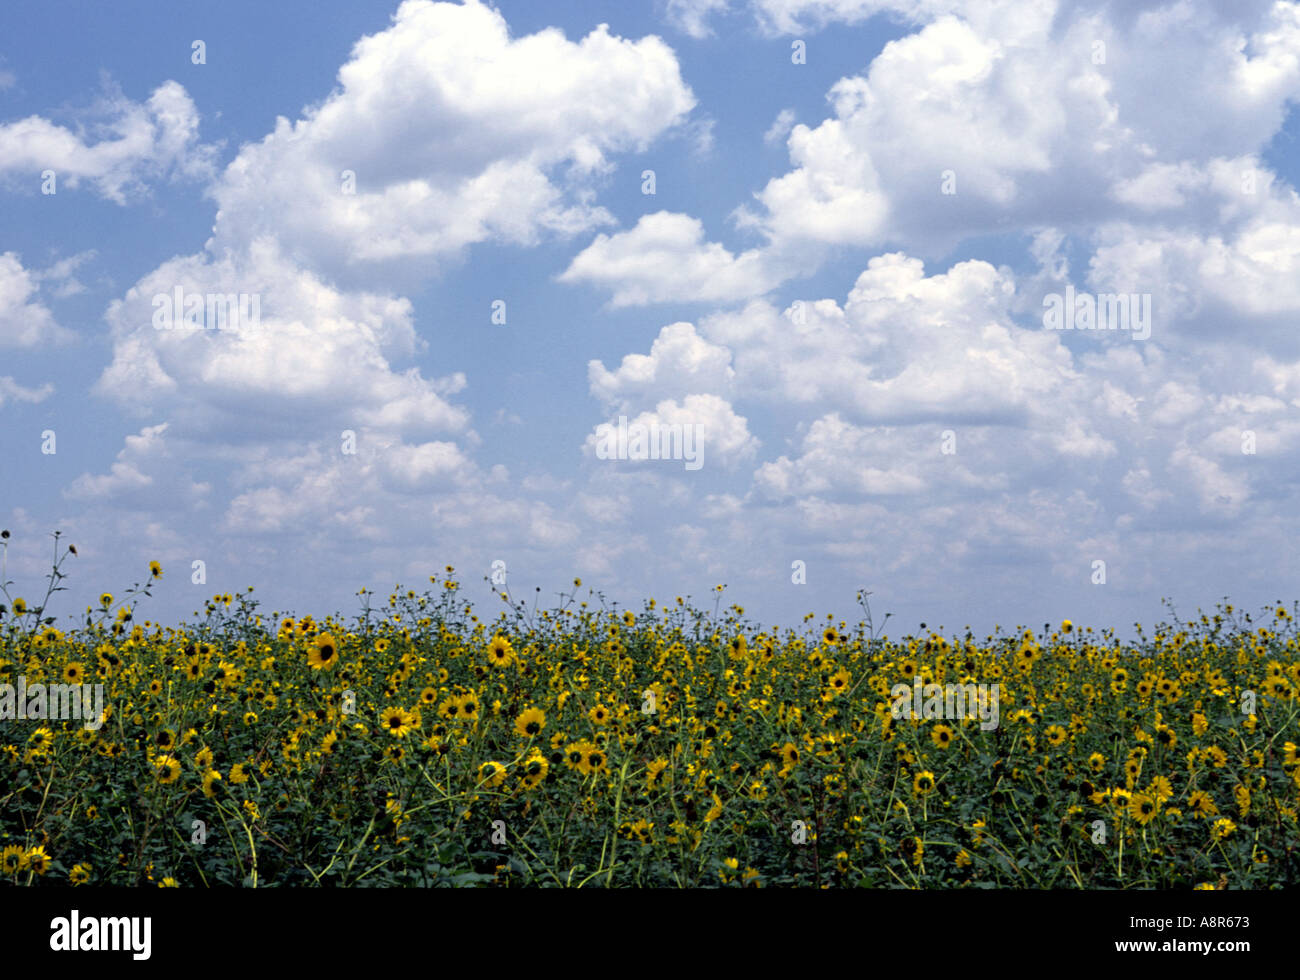 Field of West Texas Sunflowers near Castroville Texas Stock Photo